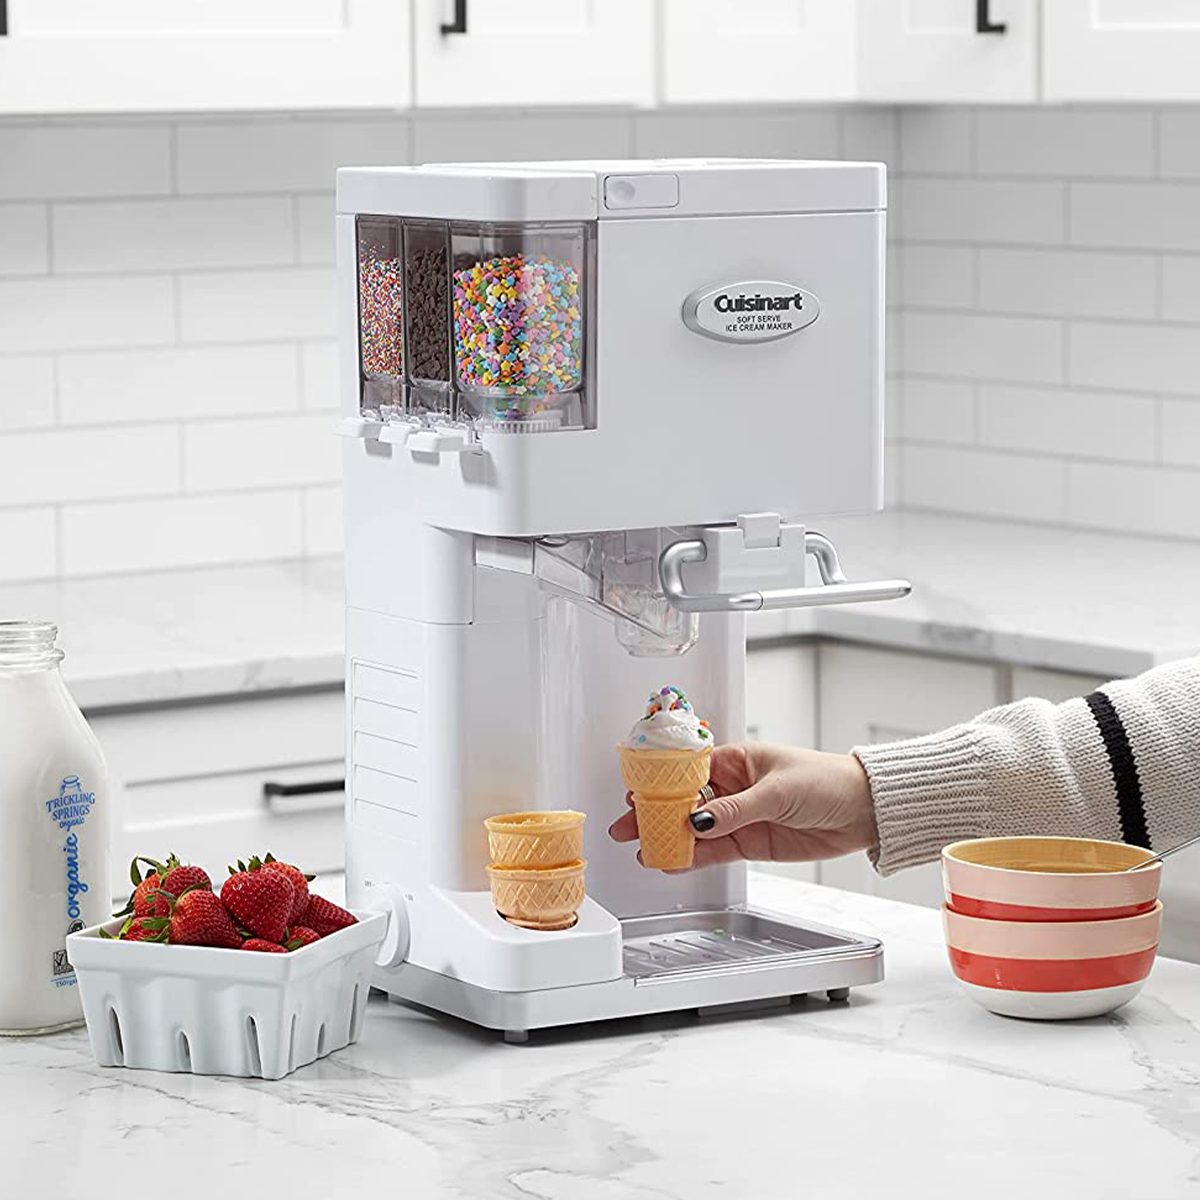 what-kind-of-ice-cream-mix-can-be-used-in-a-cuisinart-ice-cream-maker